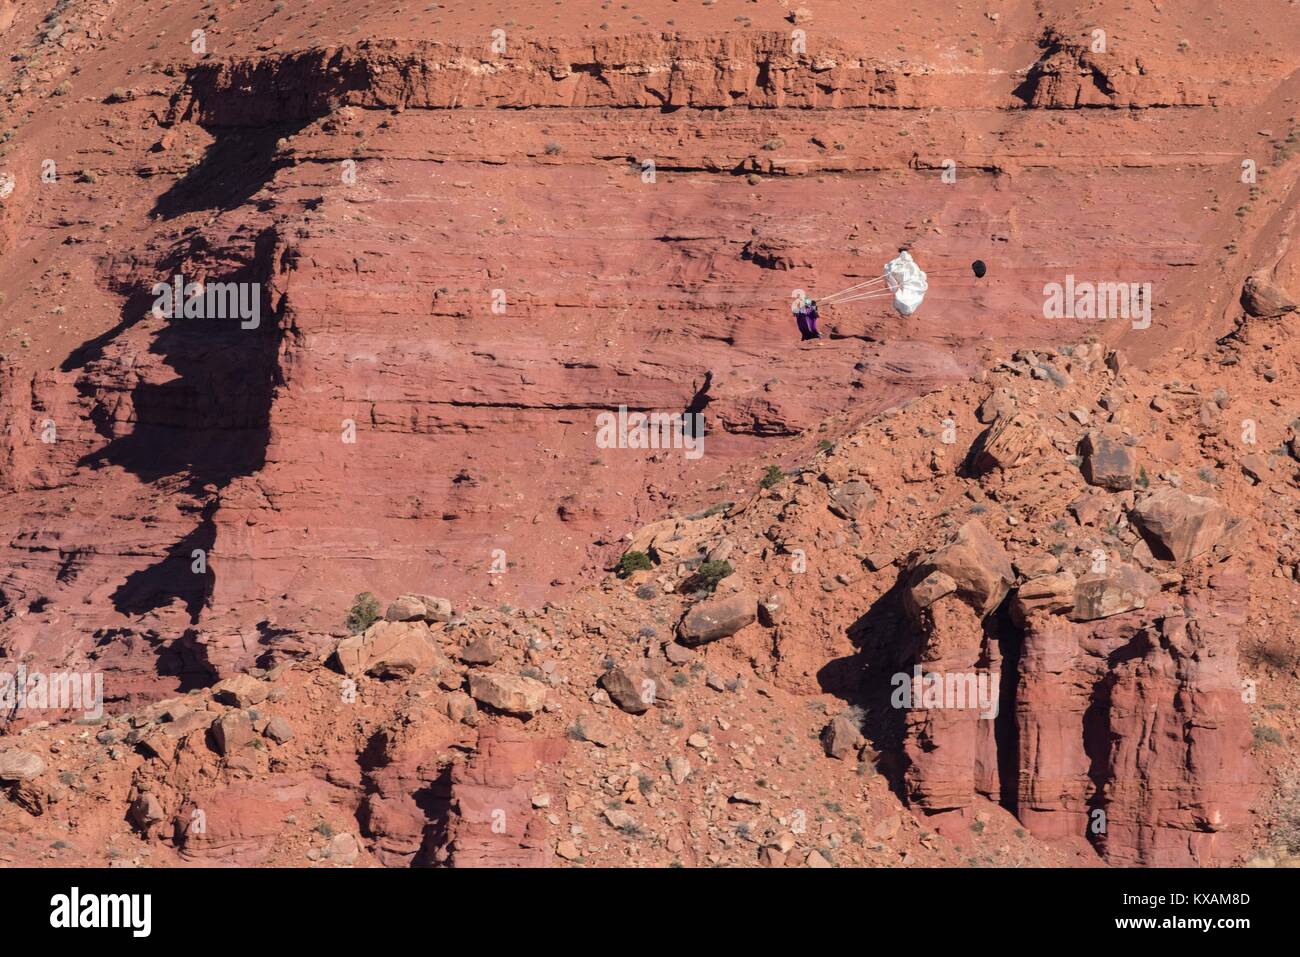 December 4, 2017 - Moab, Utah, U.S - A wingsuiter, a step above BASE jumping, pulls his chute after free falling and flying in Moab, UT. (Credit Image: © Deleigh Hermes via ZUMA Wire) Stock Photo